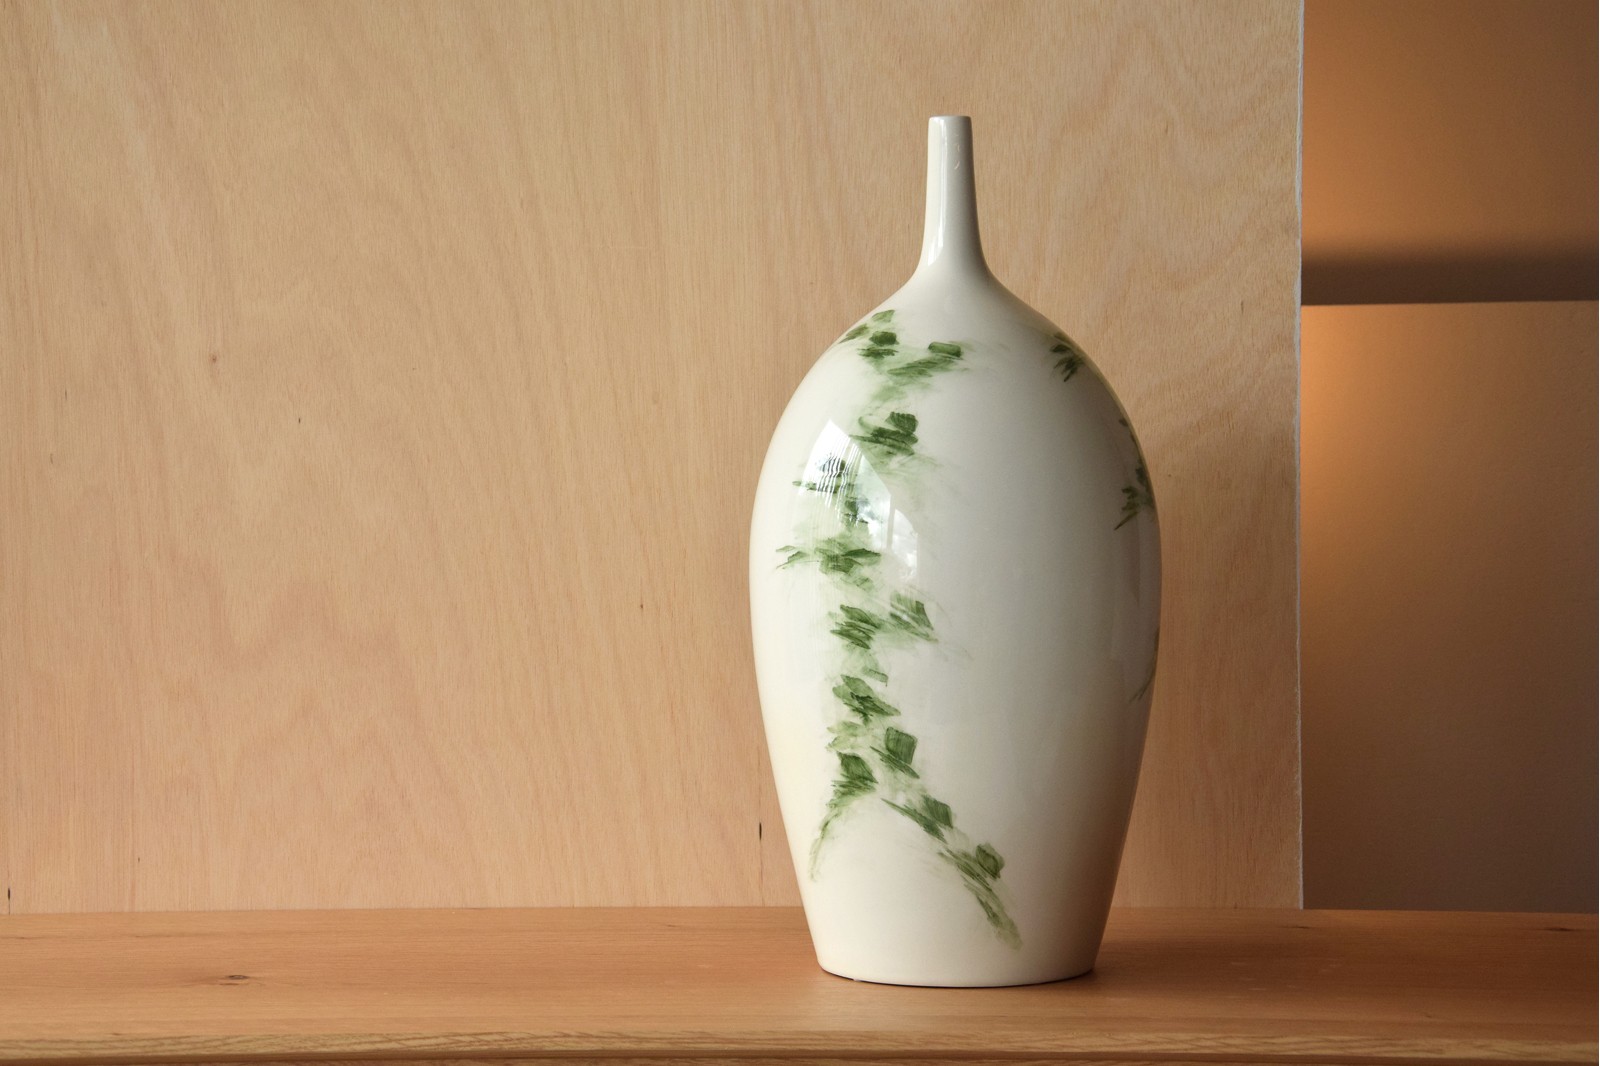 GREEN COLLECTION: HAND-PAINTED CERAMIC VASES